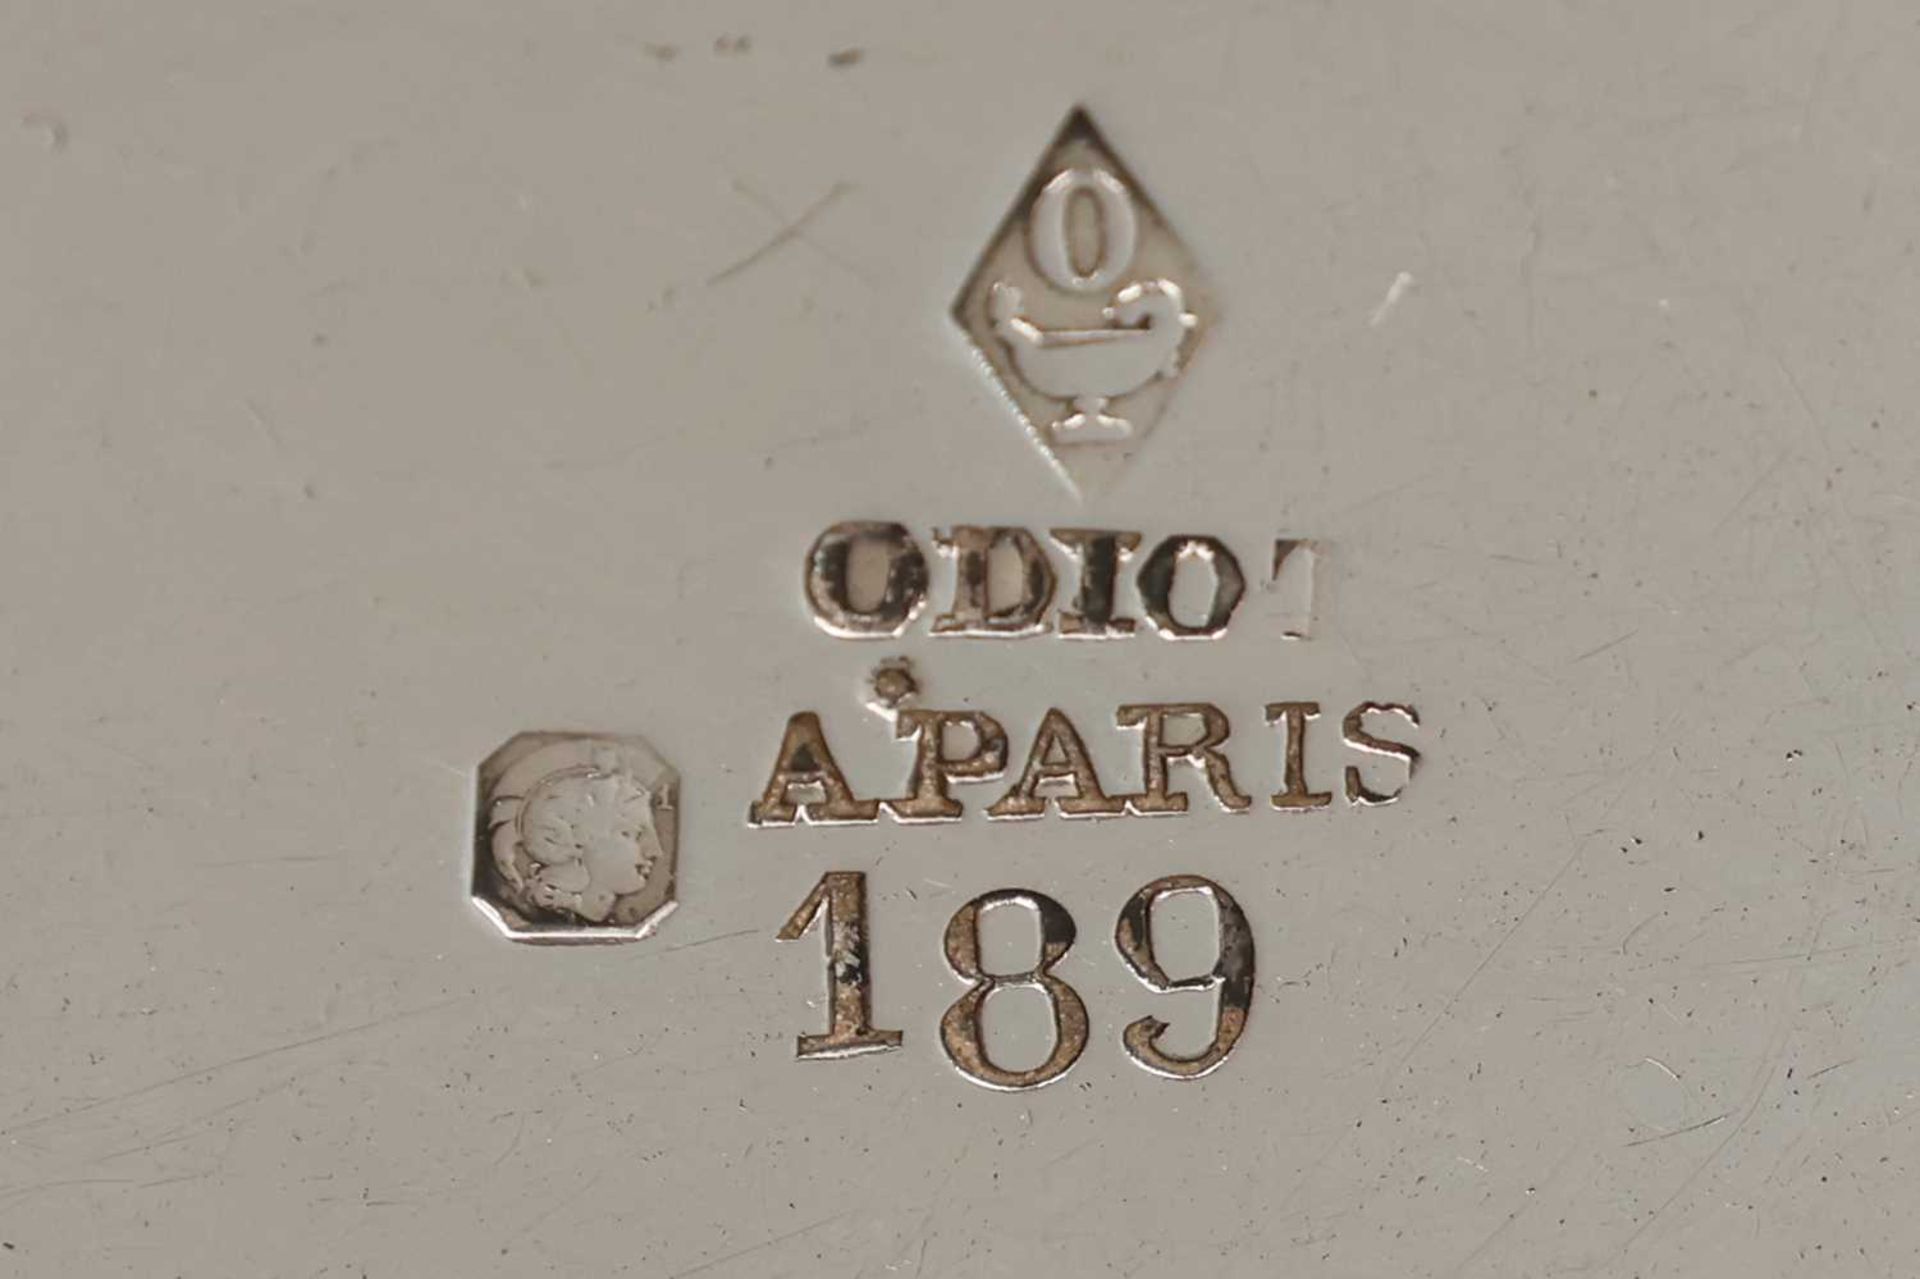 ODIOT (Paris) Silber Teeservice - Image 5 of 5